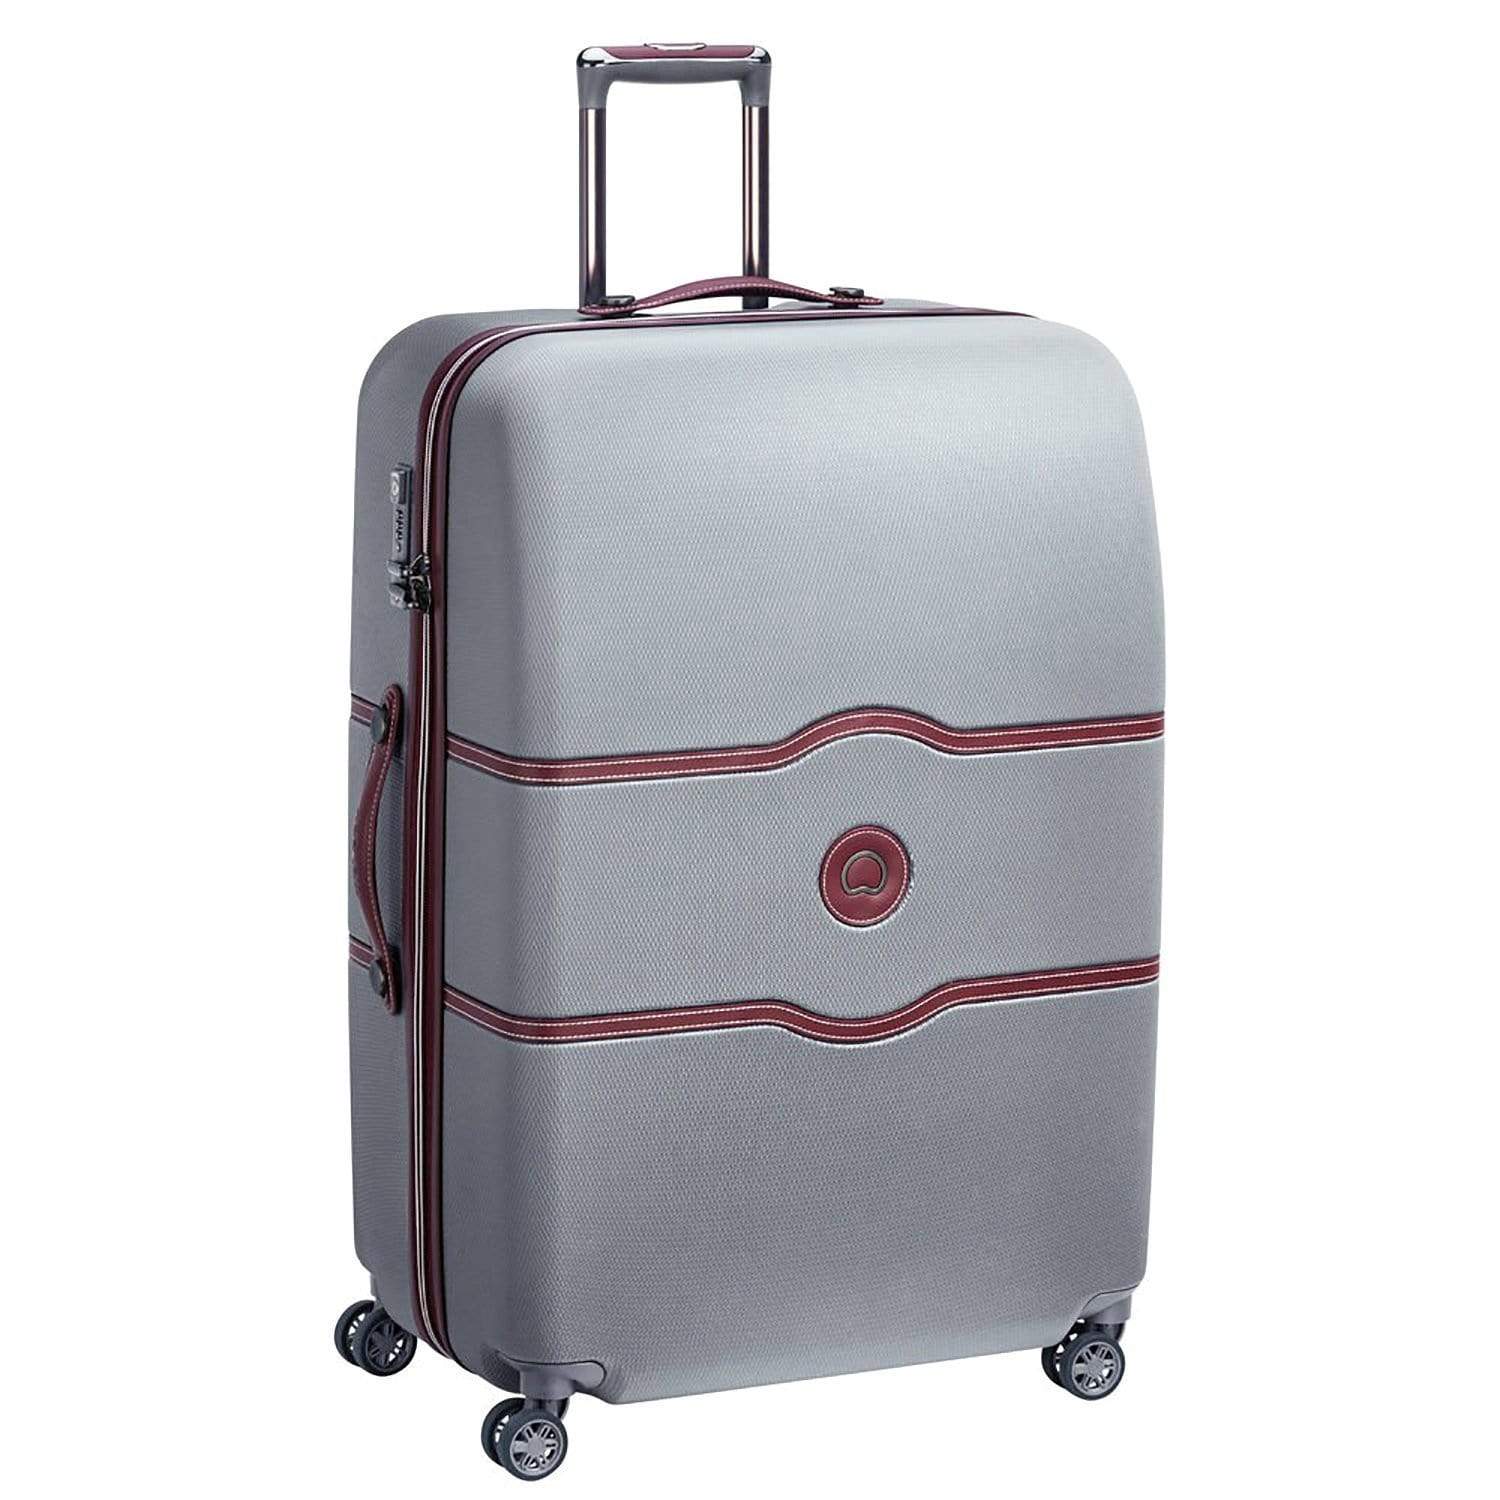 Delsey Chatelet Air Trolley Bag - Silver - 00167282111 SILVER - Jashanmal Home